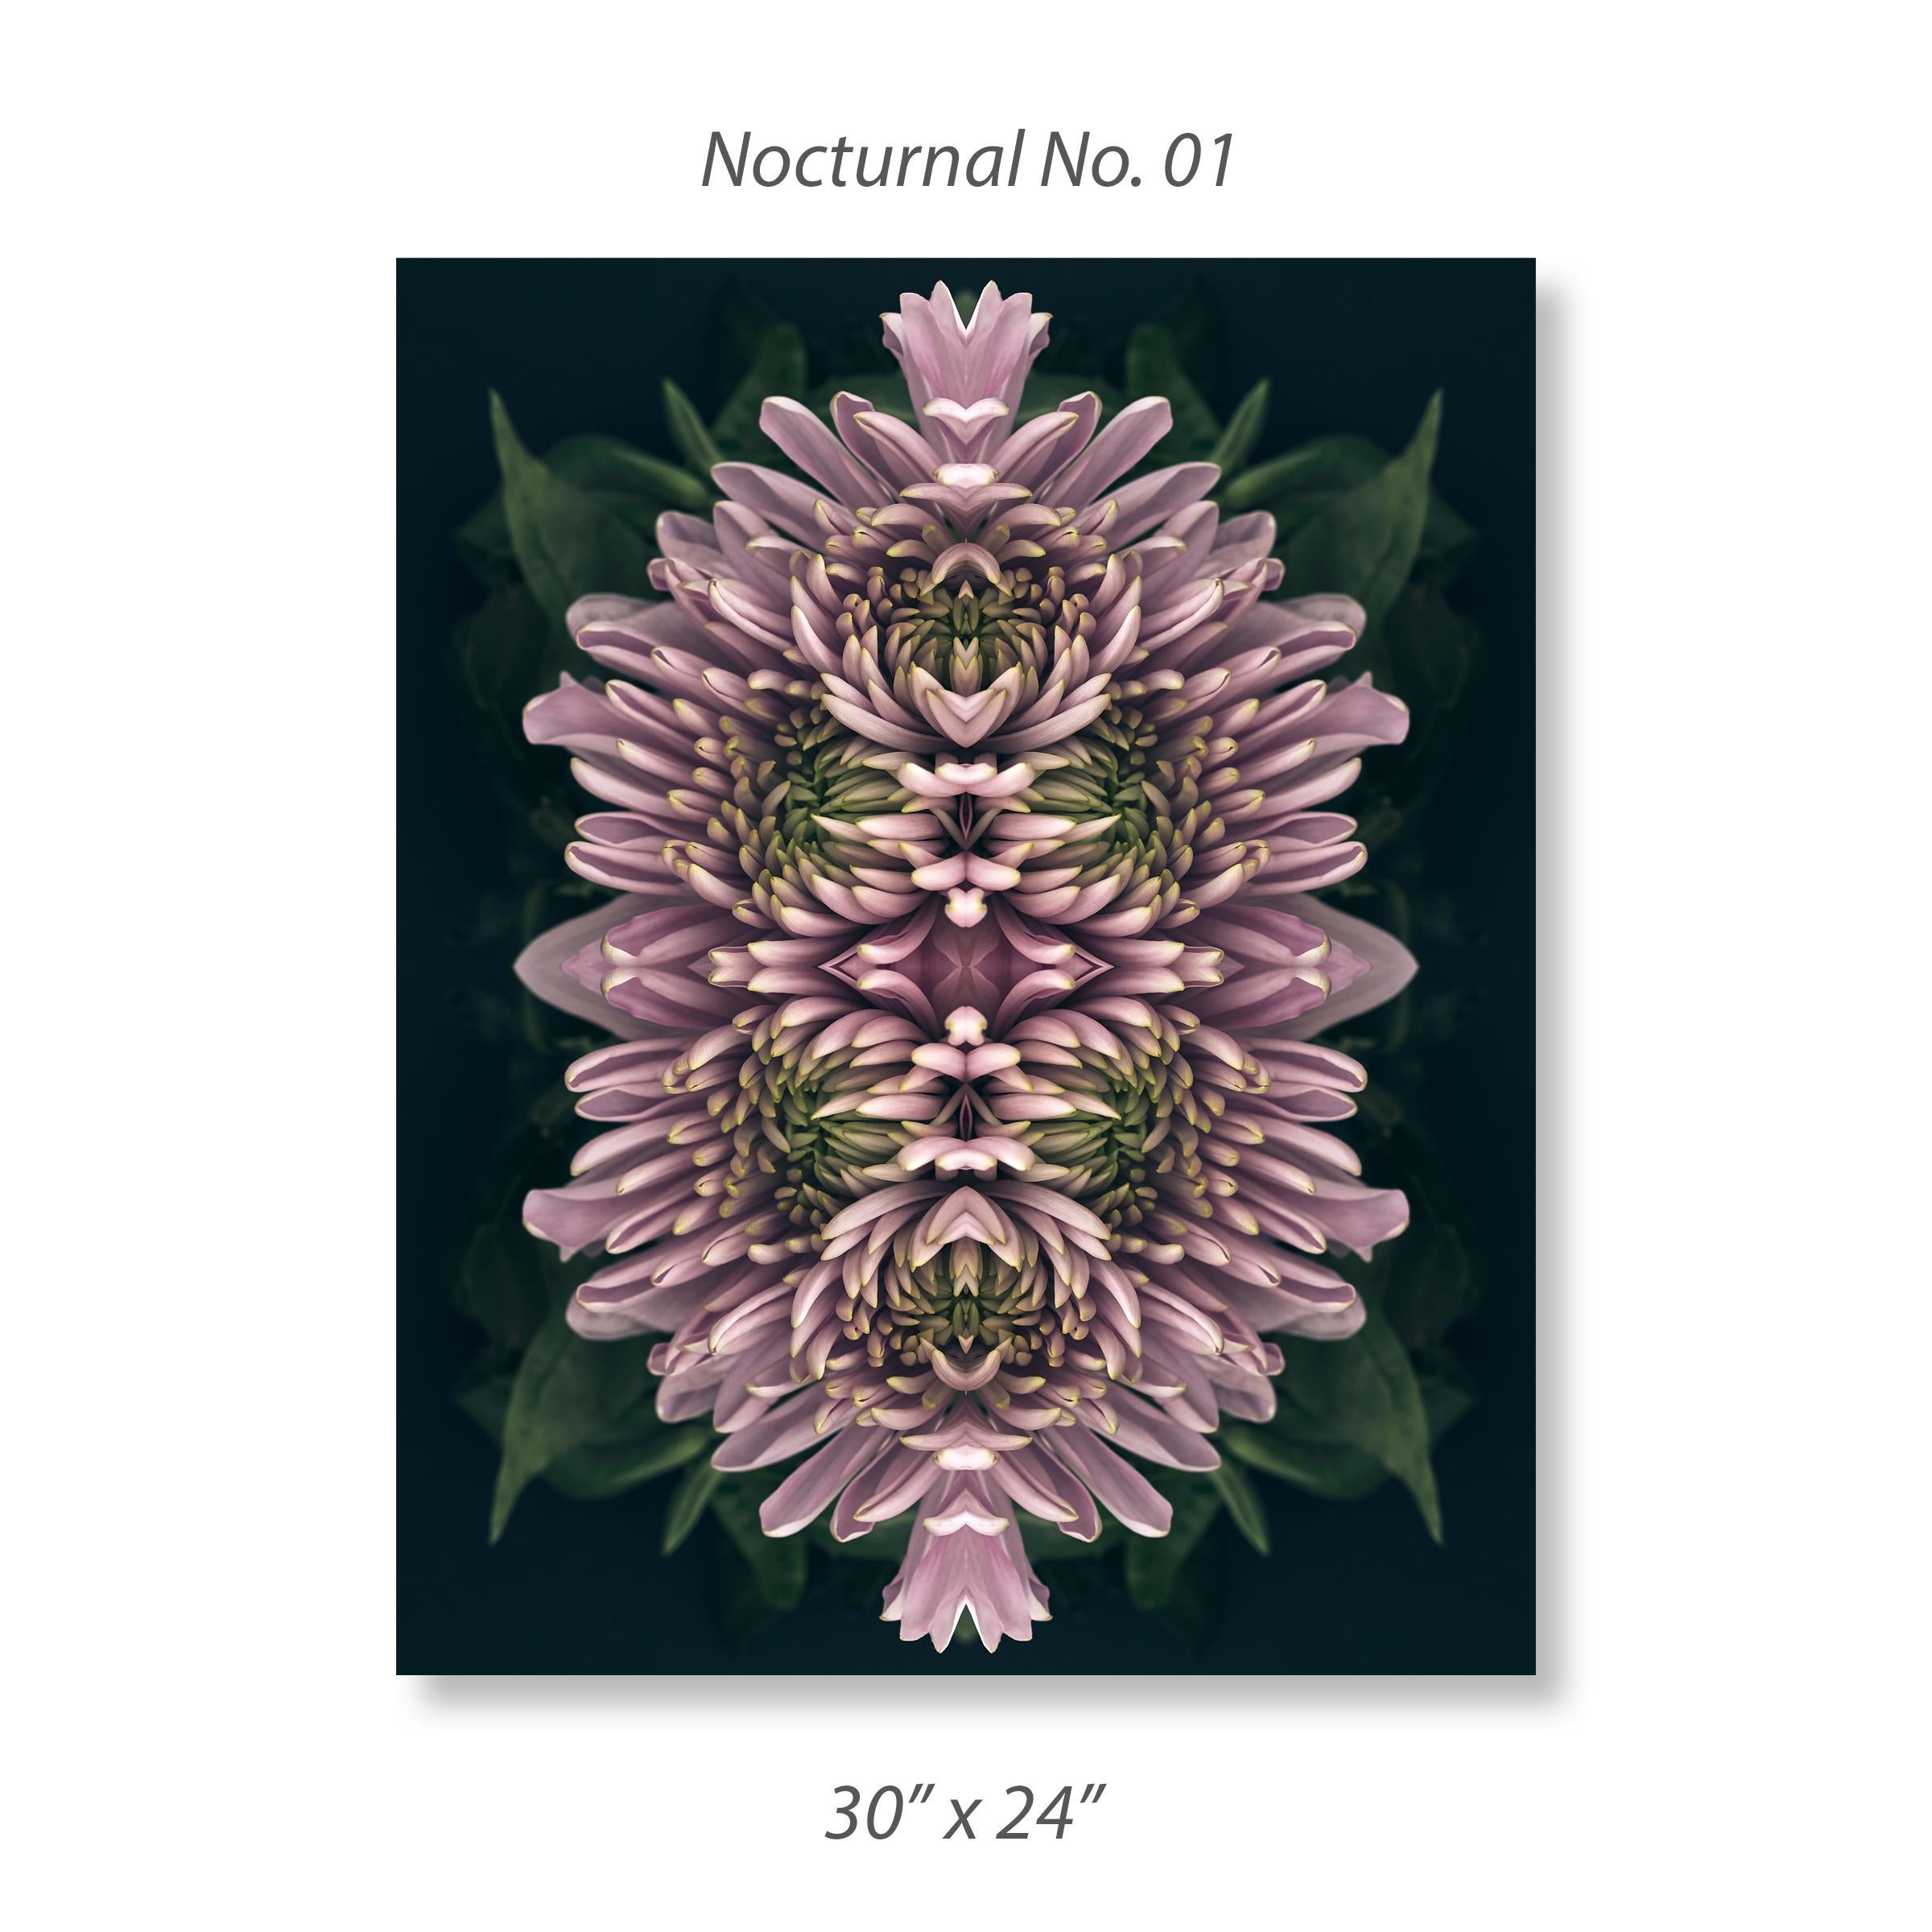 This print features the playful relationship between natural forms and botanicals. In this image Erin uses the natural composition of the purple flowers, and her own collage work, to create a hypnotic mandala with the floral. Some describe it as a